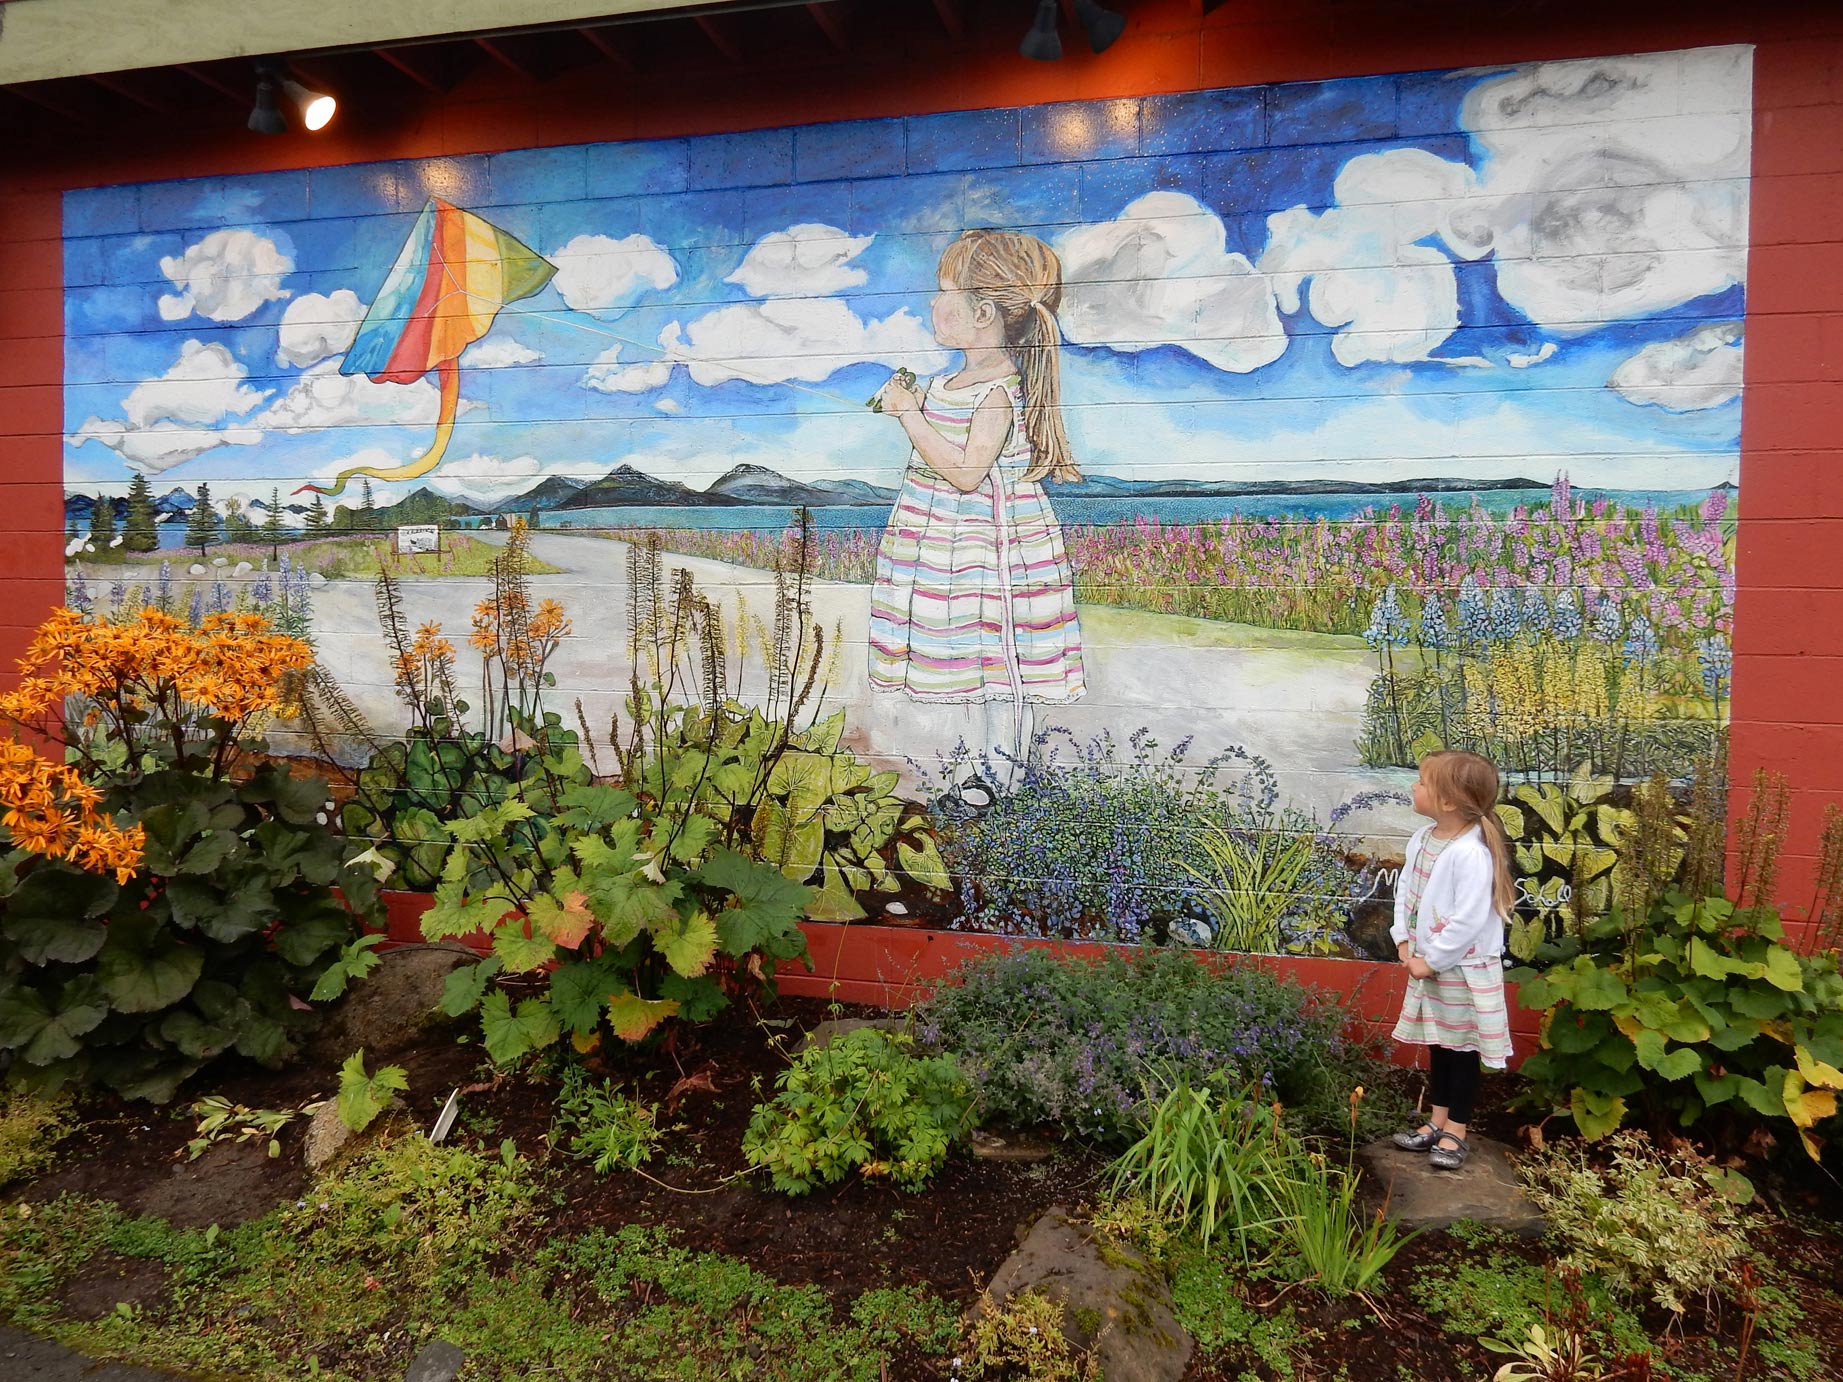 Morgan Harness, who just celebrated her 4th birthday, poses beside the Marjorie Scholl mural, in which she is pictured flying a kite. The mural, which was unveiled Friday on the side of Fat Olives is one of the last works to be installed under a $150,000 ArtPlace America grant that funded public art and artists’ residencies in Old Town.-Photo by Mercedes Harness